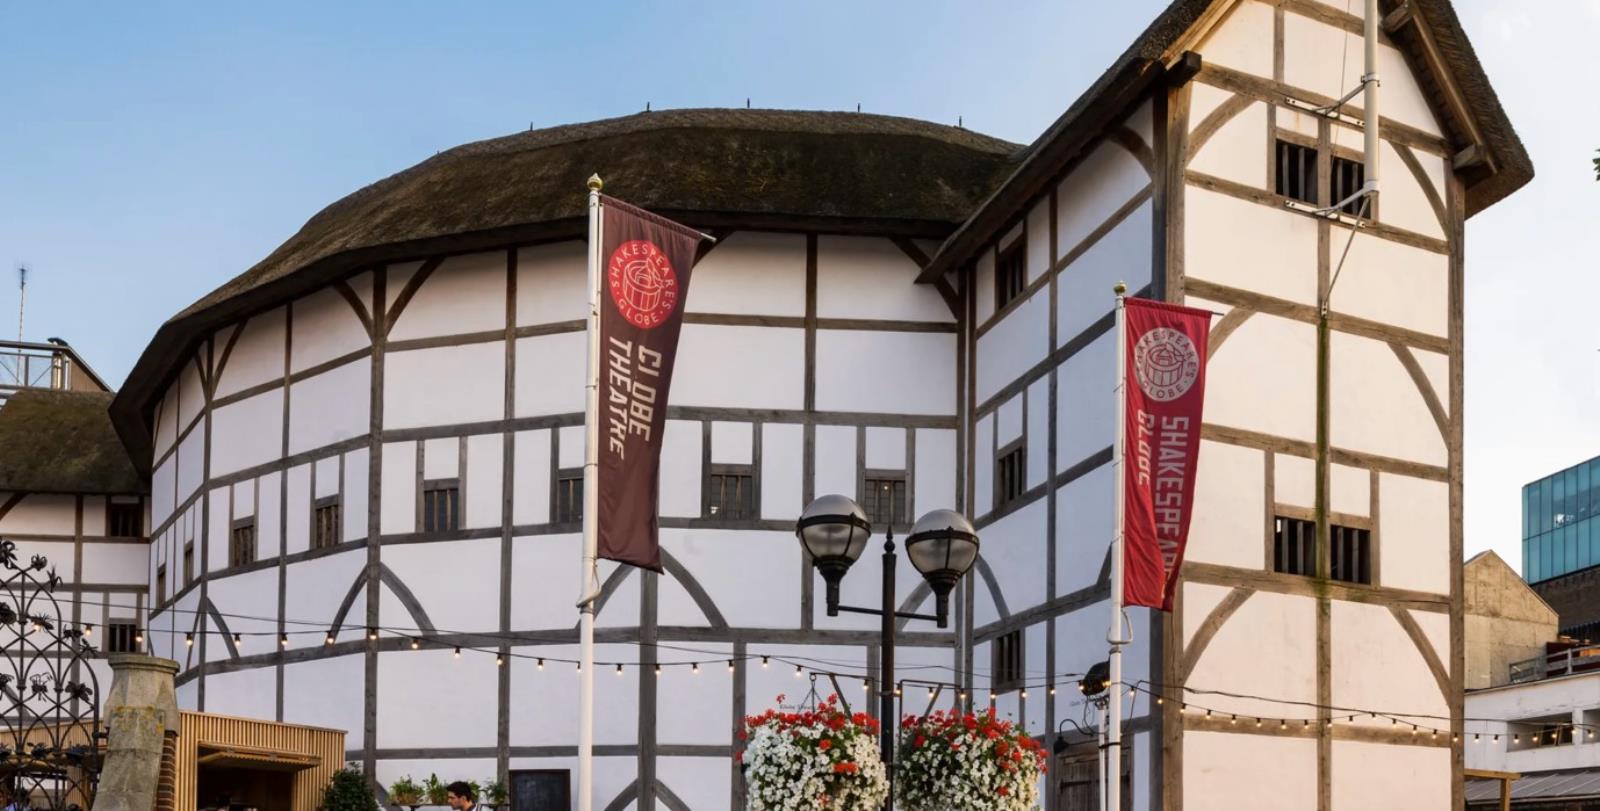 A unique Shakespearean day at The Globe